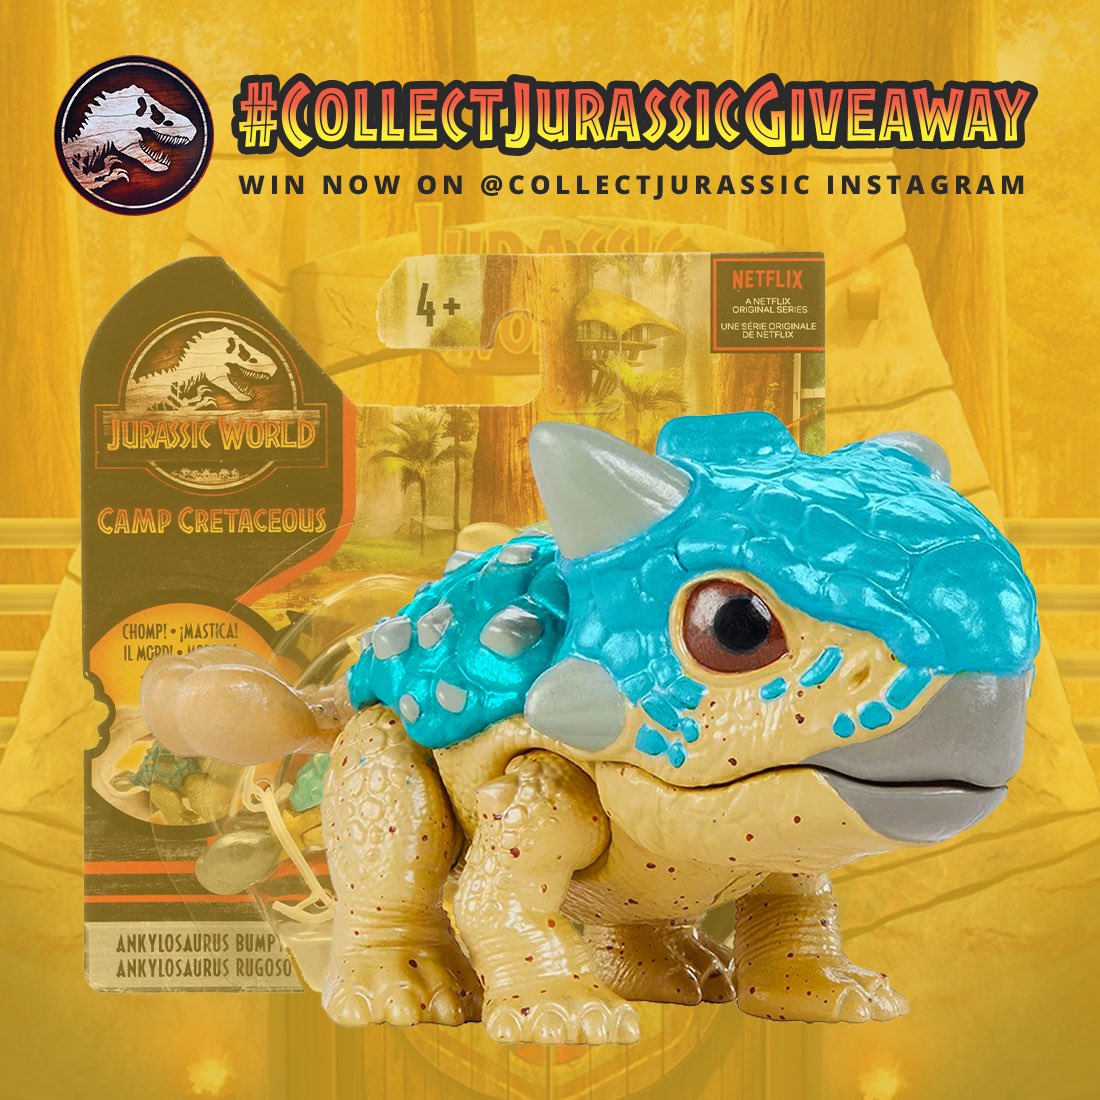 Collect Jurassic Win Snap Squad Bumpy The Ankylosaurus Even More Jurassic World Camp Cretaceous Toys In The Latest Collectjurassicgiveaway We Ll Draw The Winner On September 18 When The